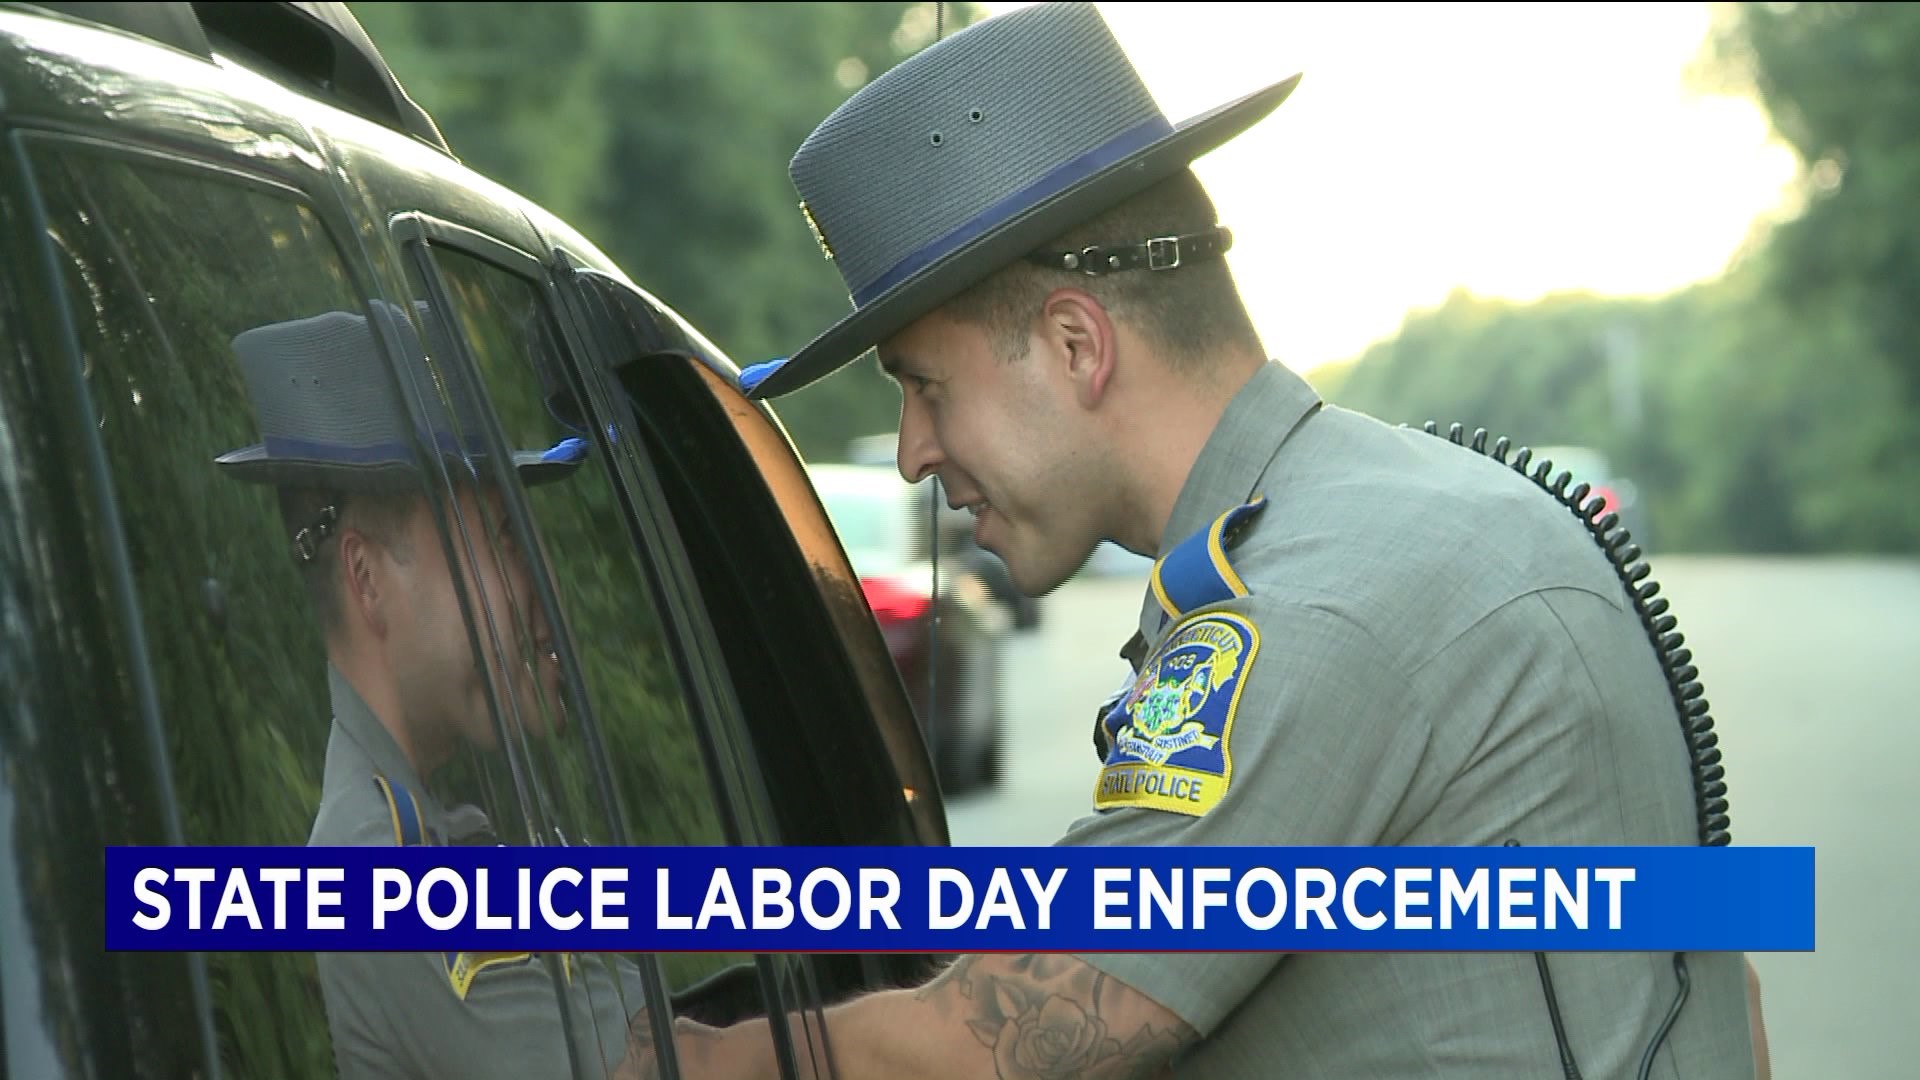 State Police Labor Day enforcement